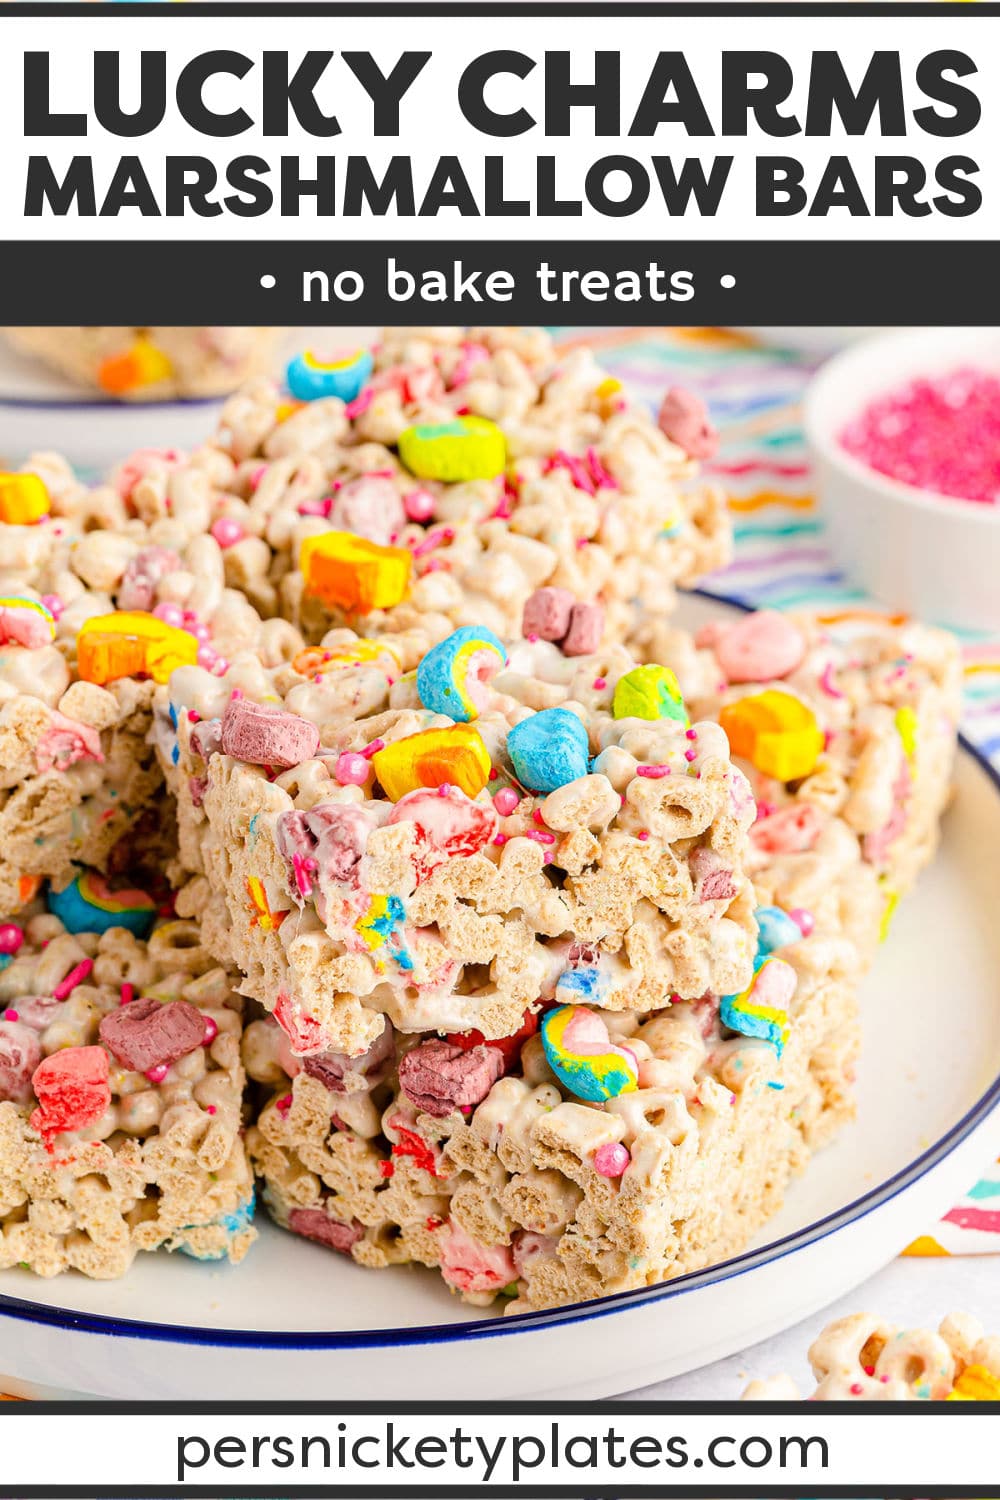 Lucky charms treats are a no bake dessert made with 15 minutes of prep time using everyone's favorite cereal! They're loaded with colorful lucky charms and melty marshmallows set into festive, chewy, gooey squares that are perfect for all your St. Patrick's Day dessert trays! | www.persnicketyplates.com